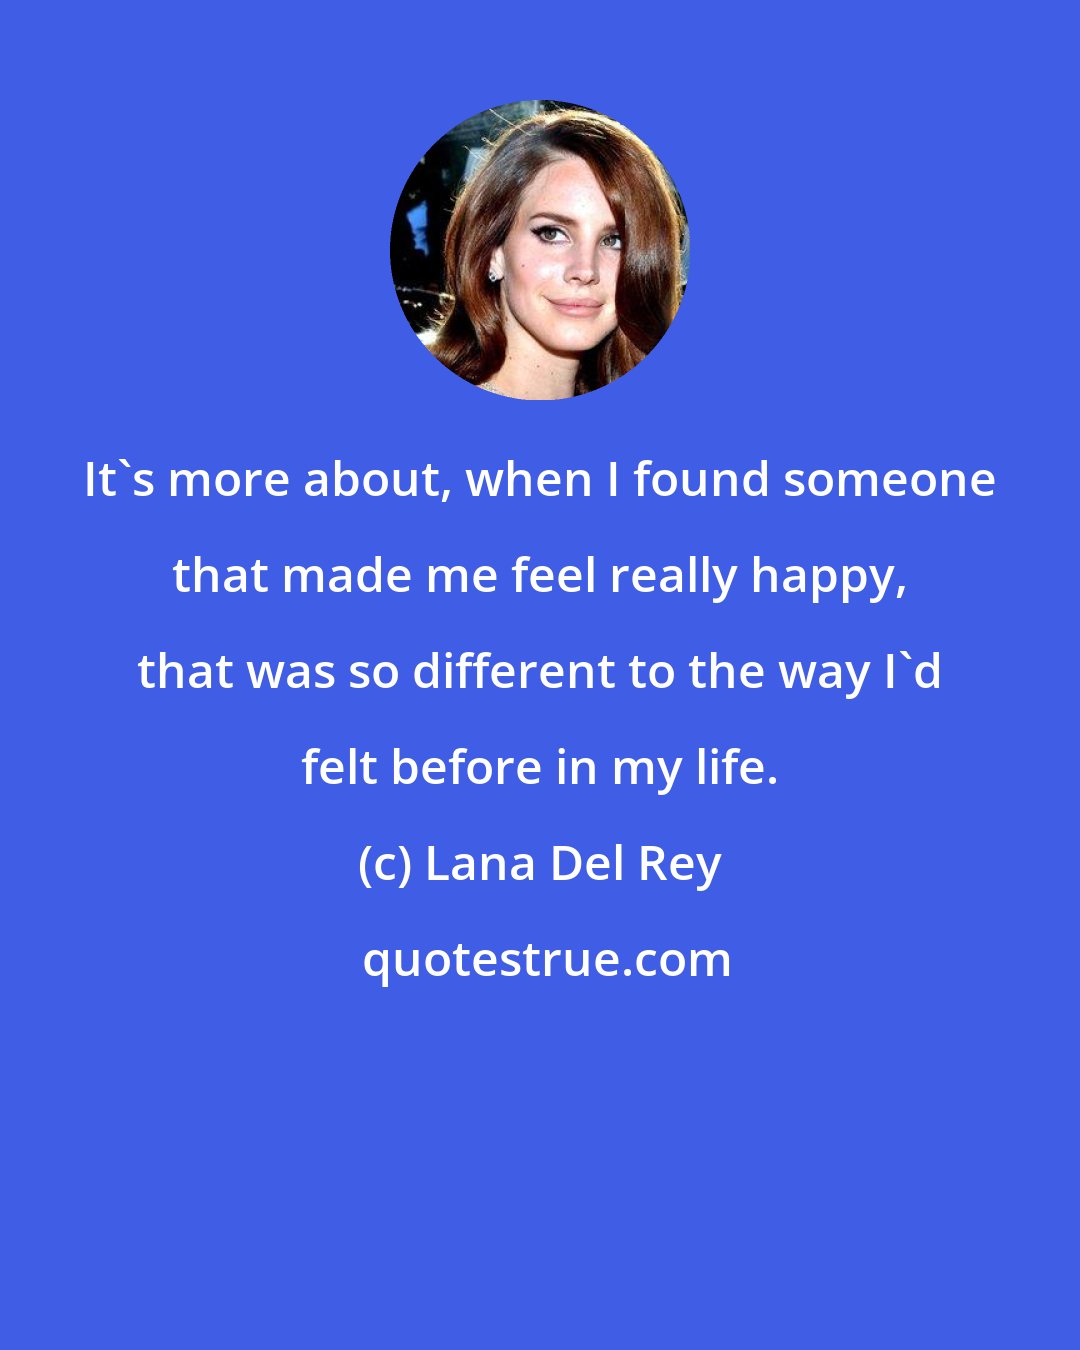 Lana Del Rey: It's more about, when I found someone that made me feel really happy, that was so different to the way I'd felt before in my life.